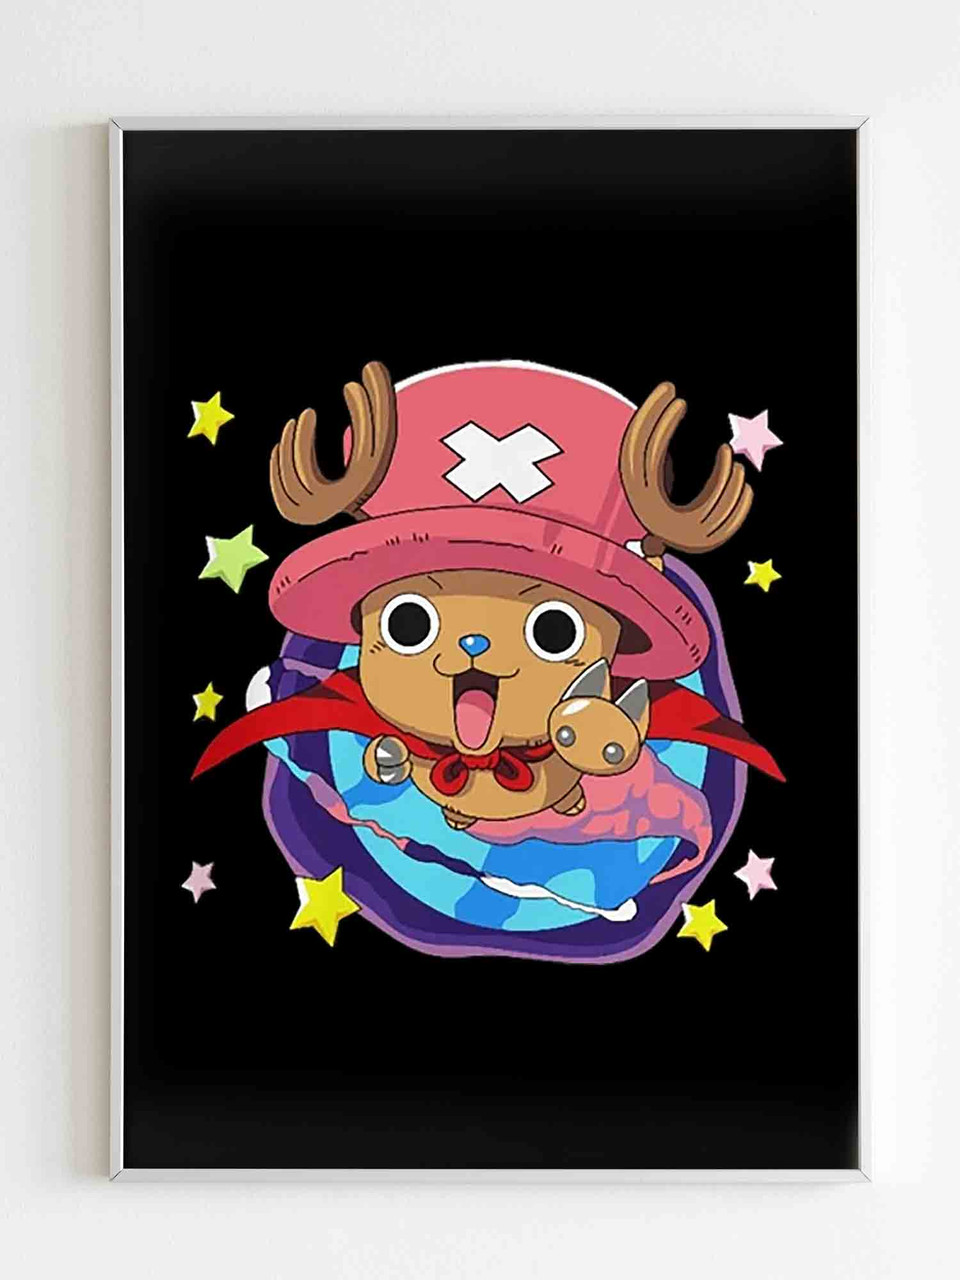 Buy Tony Tony Chopper One Piece Anime Manga Cosplay Kawaii Soft Toy Plush  Stuffed Toys (Movie Blue : 30cm) Online at Low Prices in India - Amazon.in